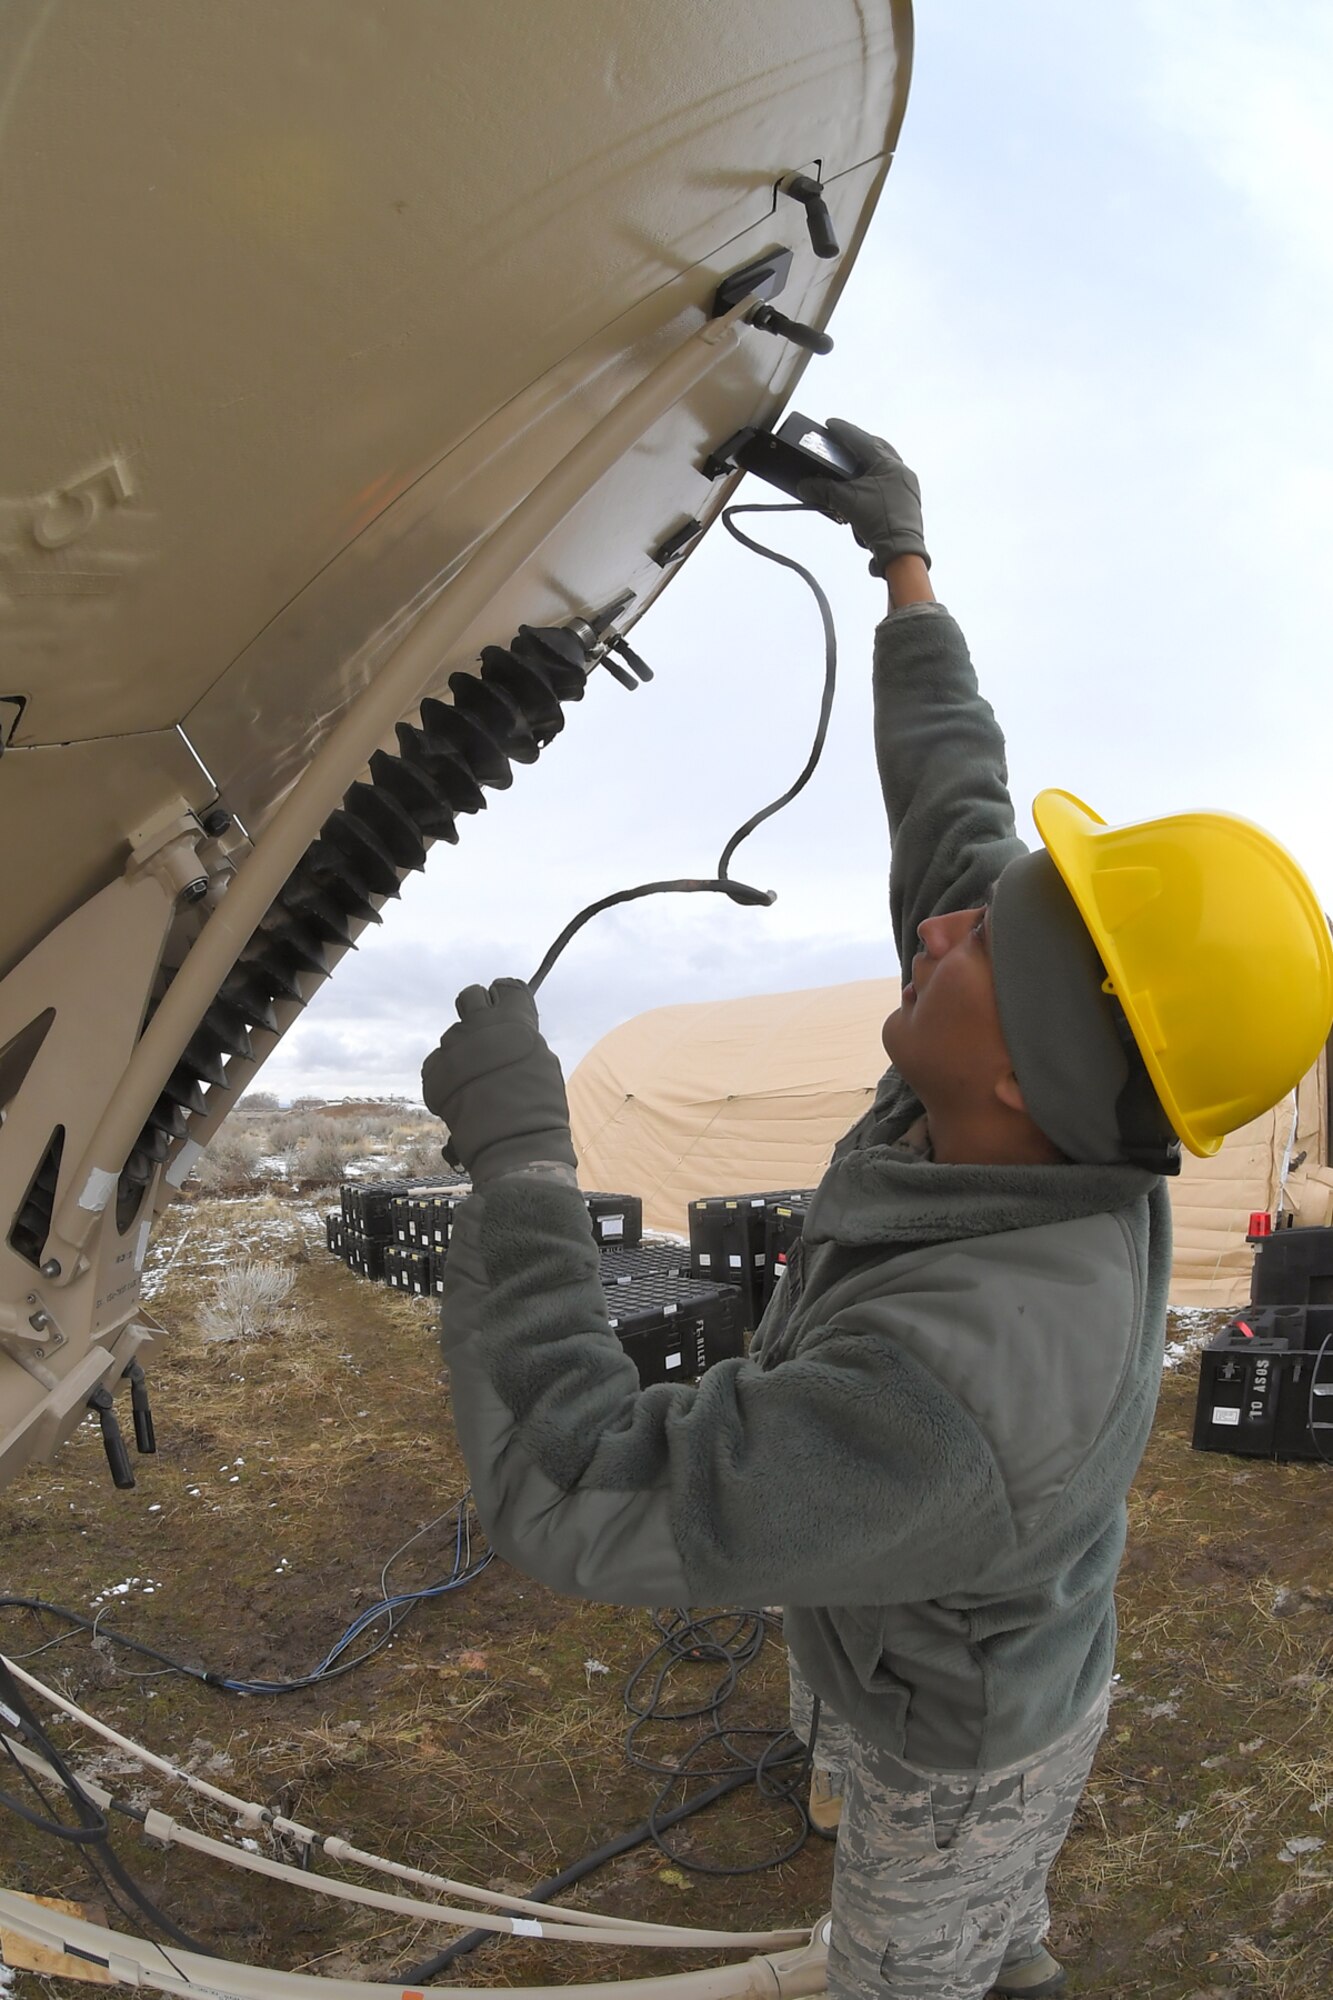 Airman 1st Class Austin Myers, 729th Air Control Squadron, plug cables into a communications antenna Feb. 5 2019, during a readiness exercise at Hill Air Force Base, Utah. The evolution was part of an exercise to mobilize and set up a deployed radar location and control reporting center. (U.S. Air Force photo by Todd Cromar)